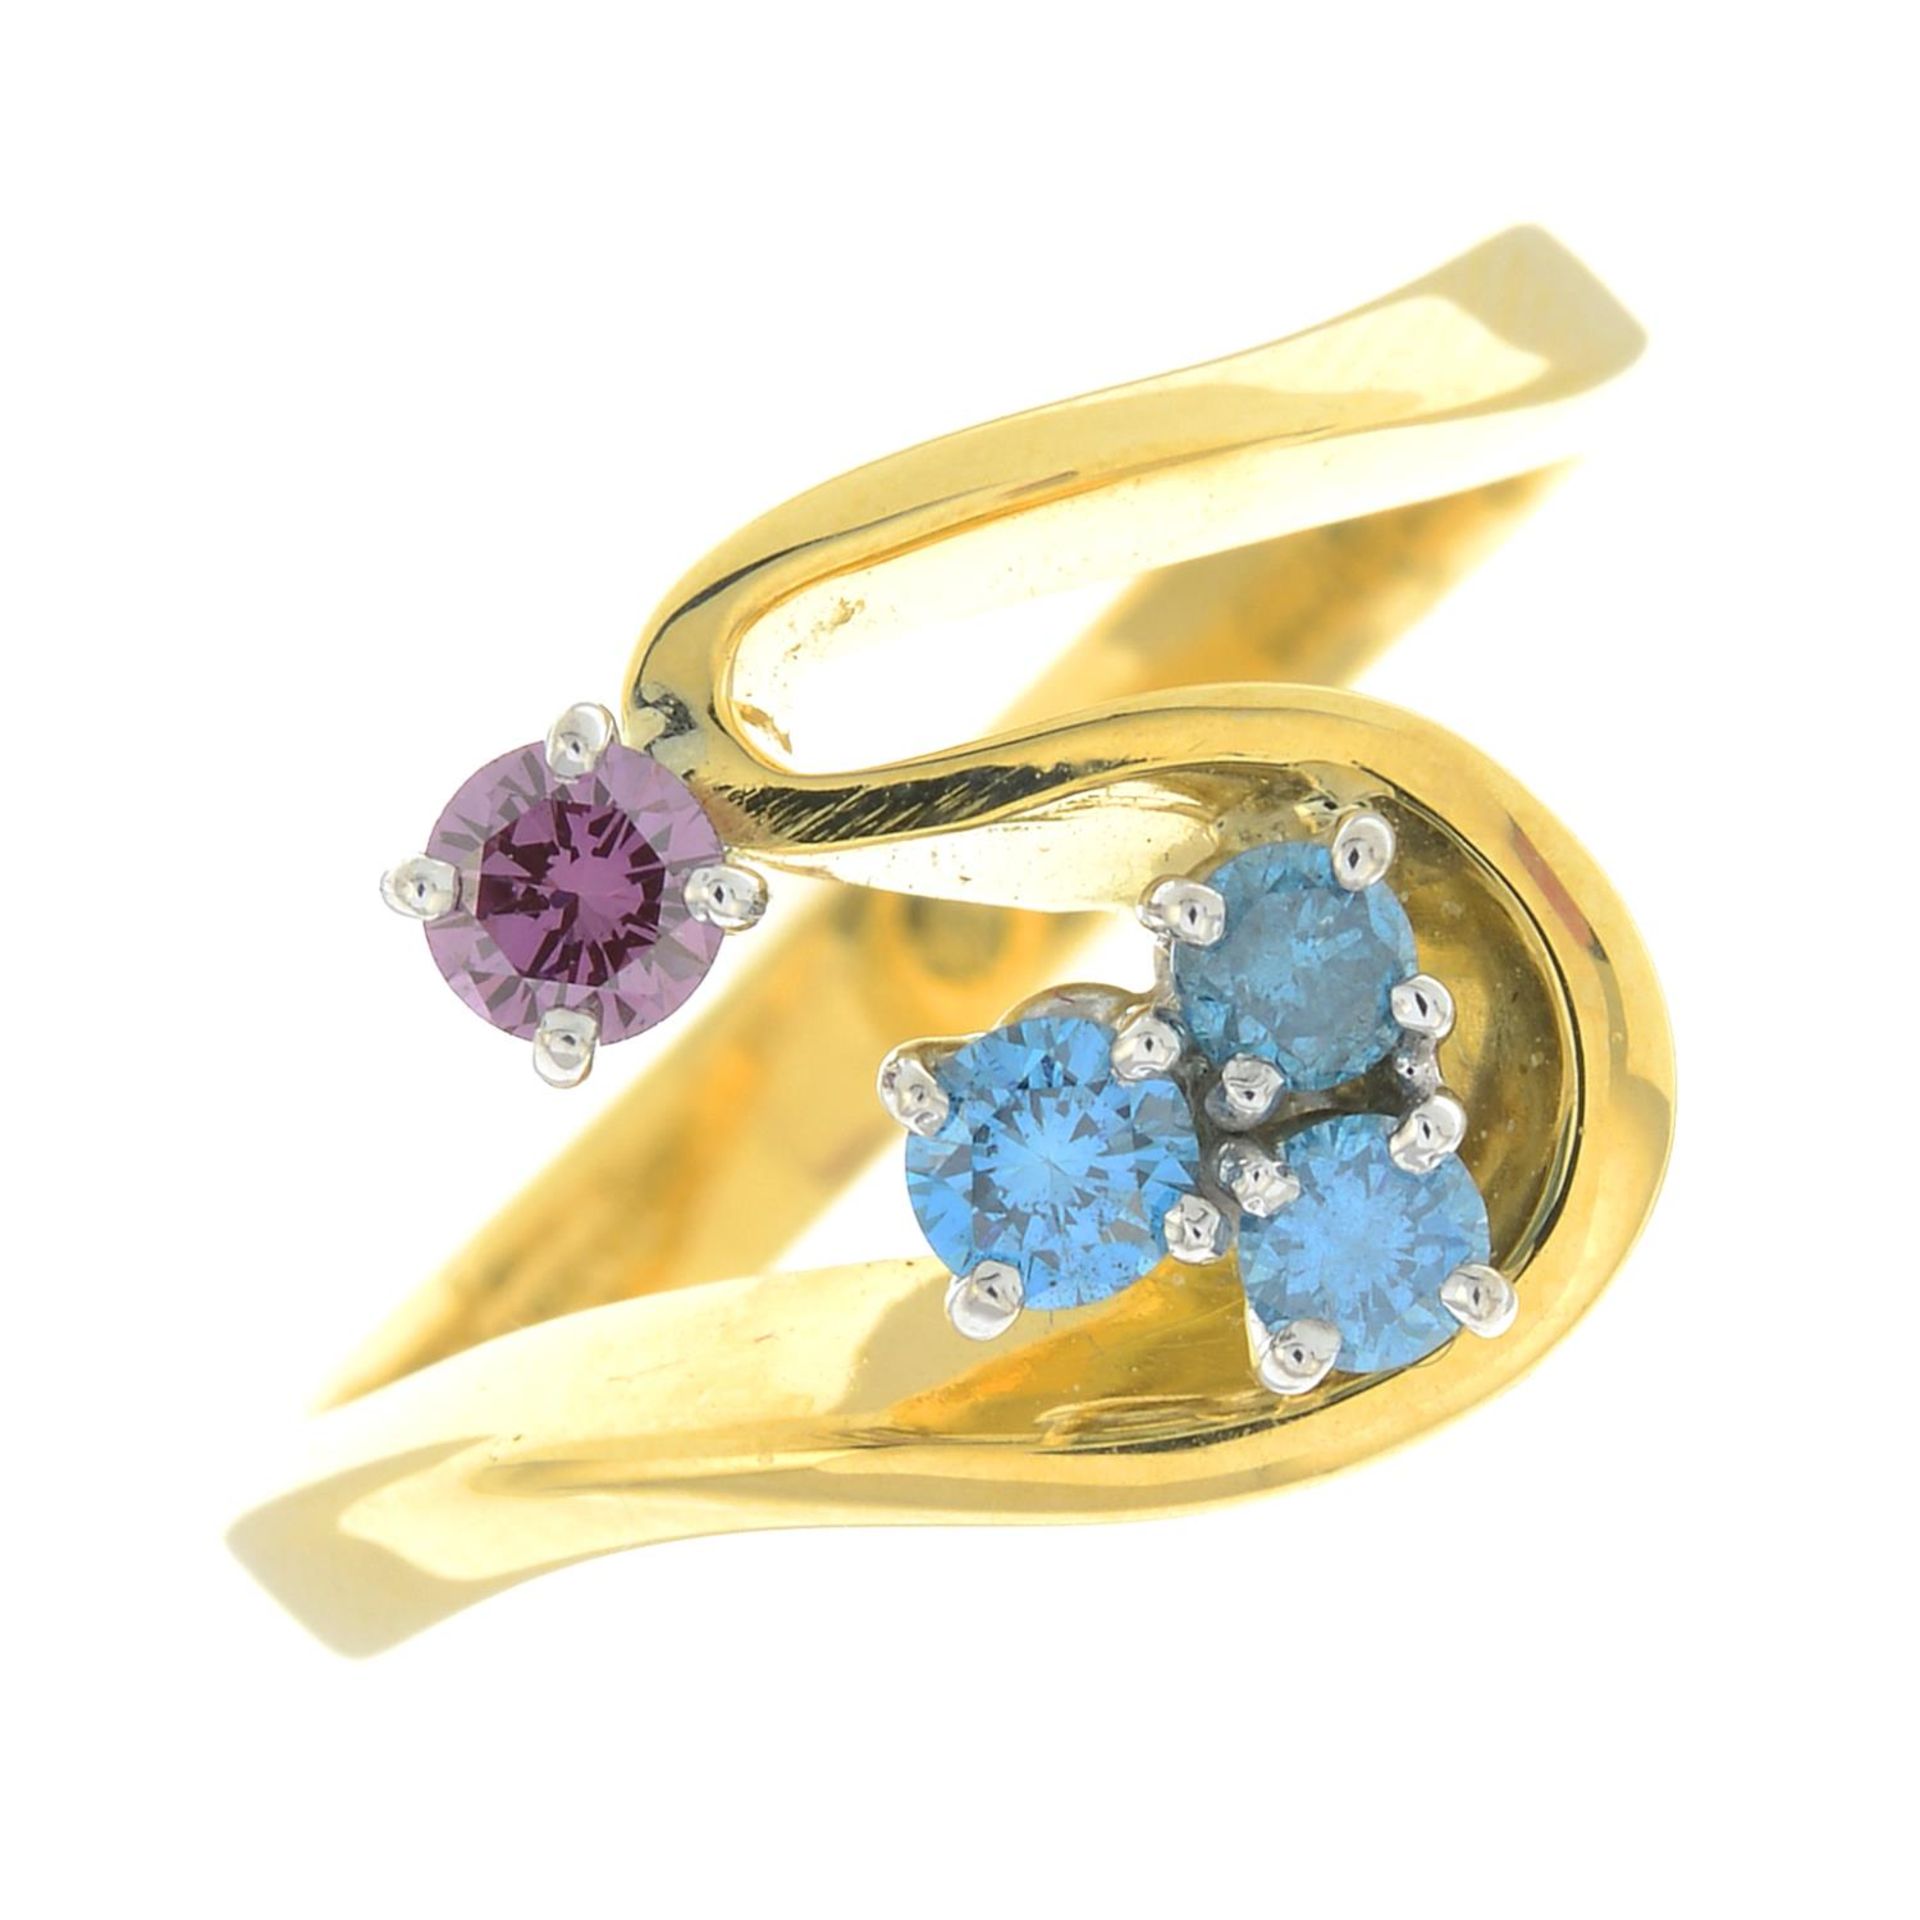 An 18ct gold colour-treated 'pink' and 'blue' diamond ring.Hallmarks for 18ct gold.Ring size K.